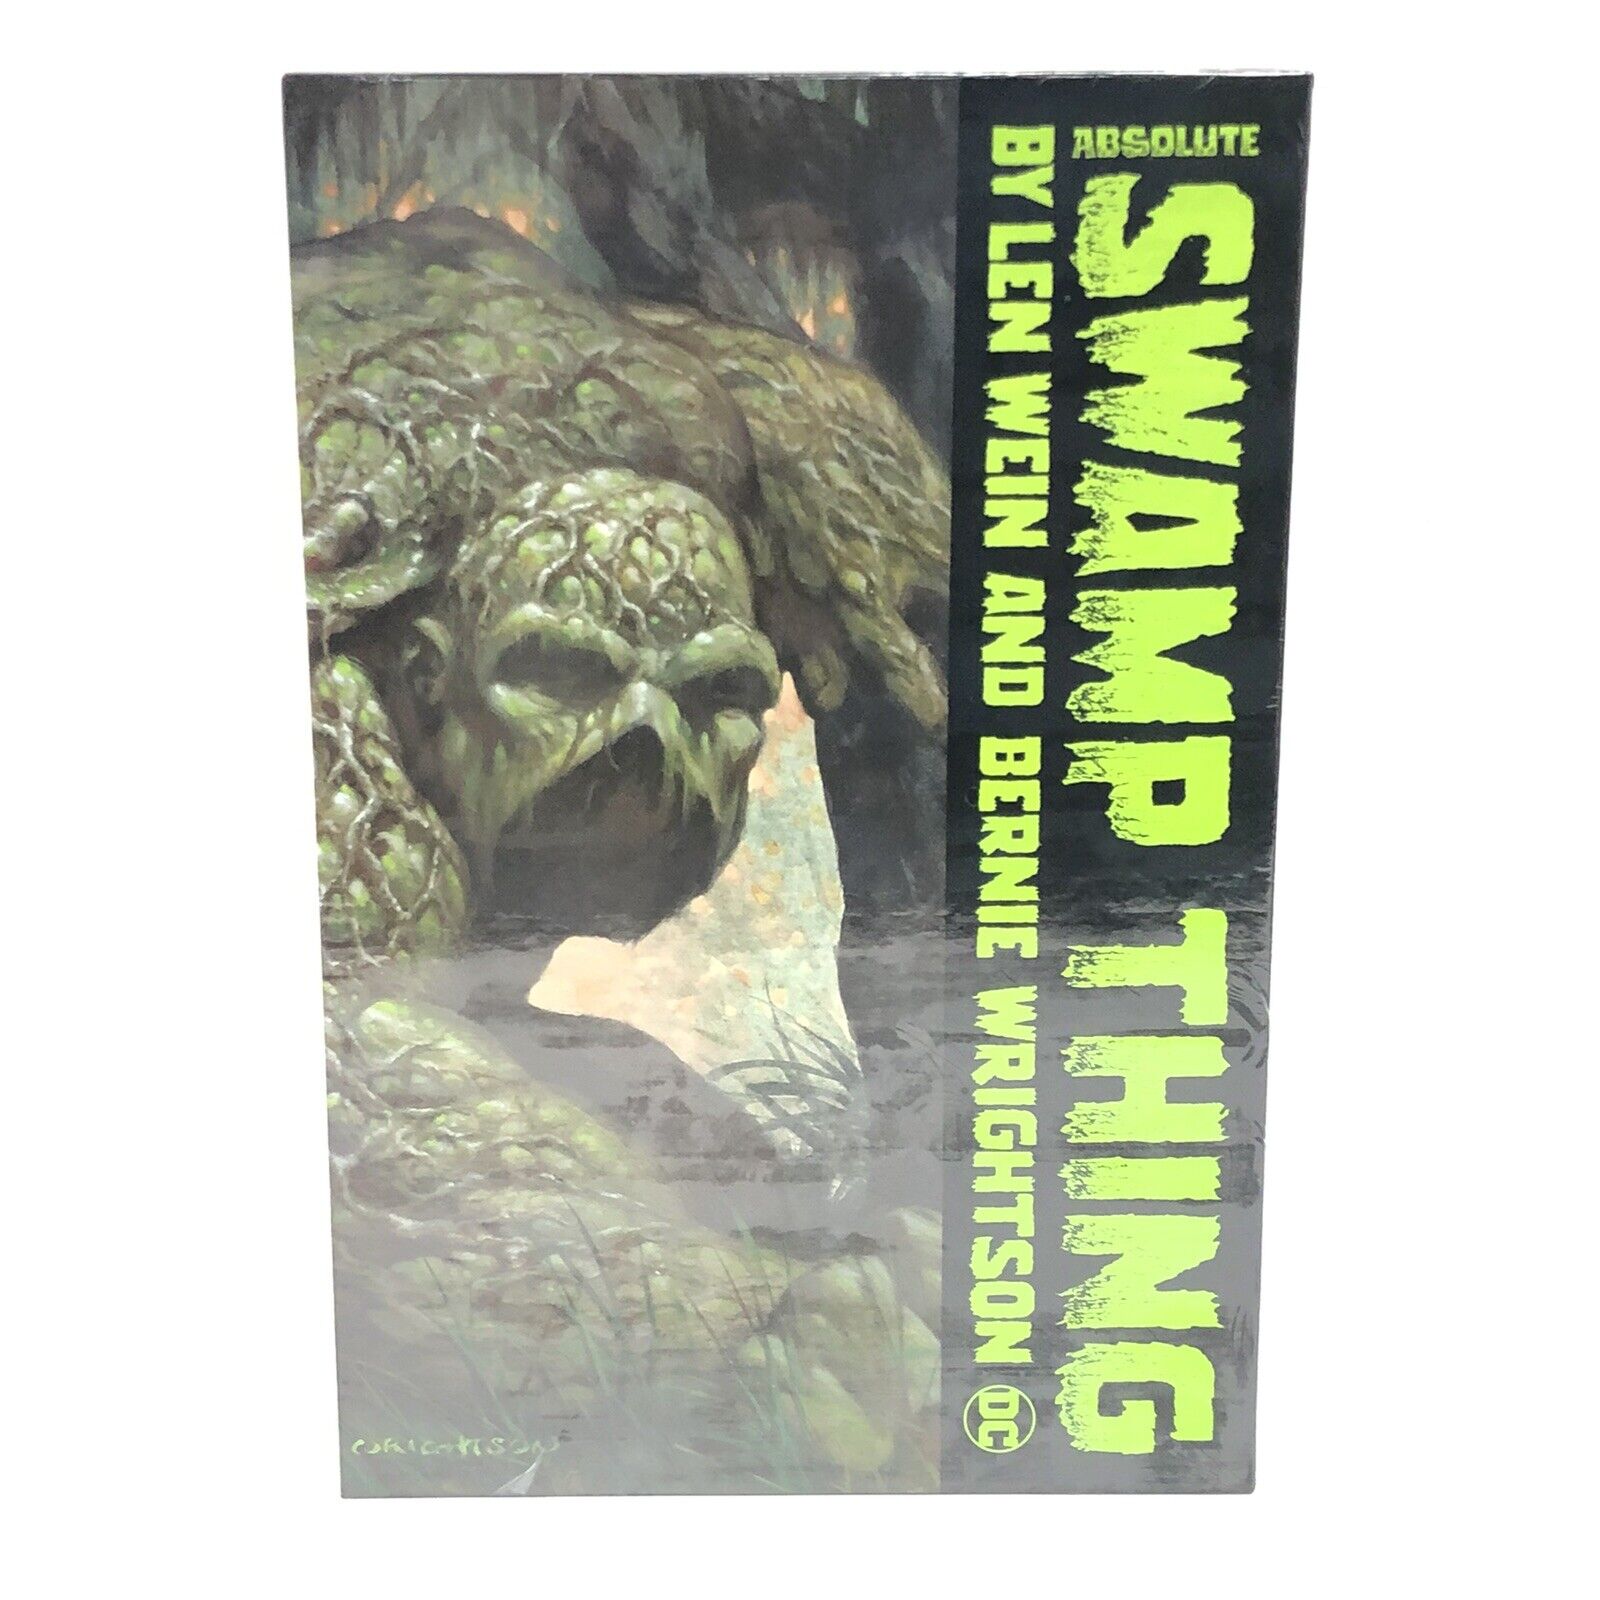 Absolute Swamp Thing by Len Wein & Bernie Wrightson New DC Comics HC Sealed